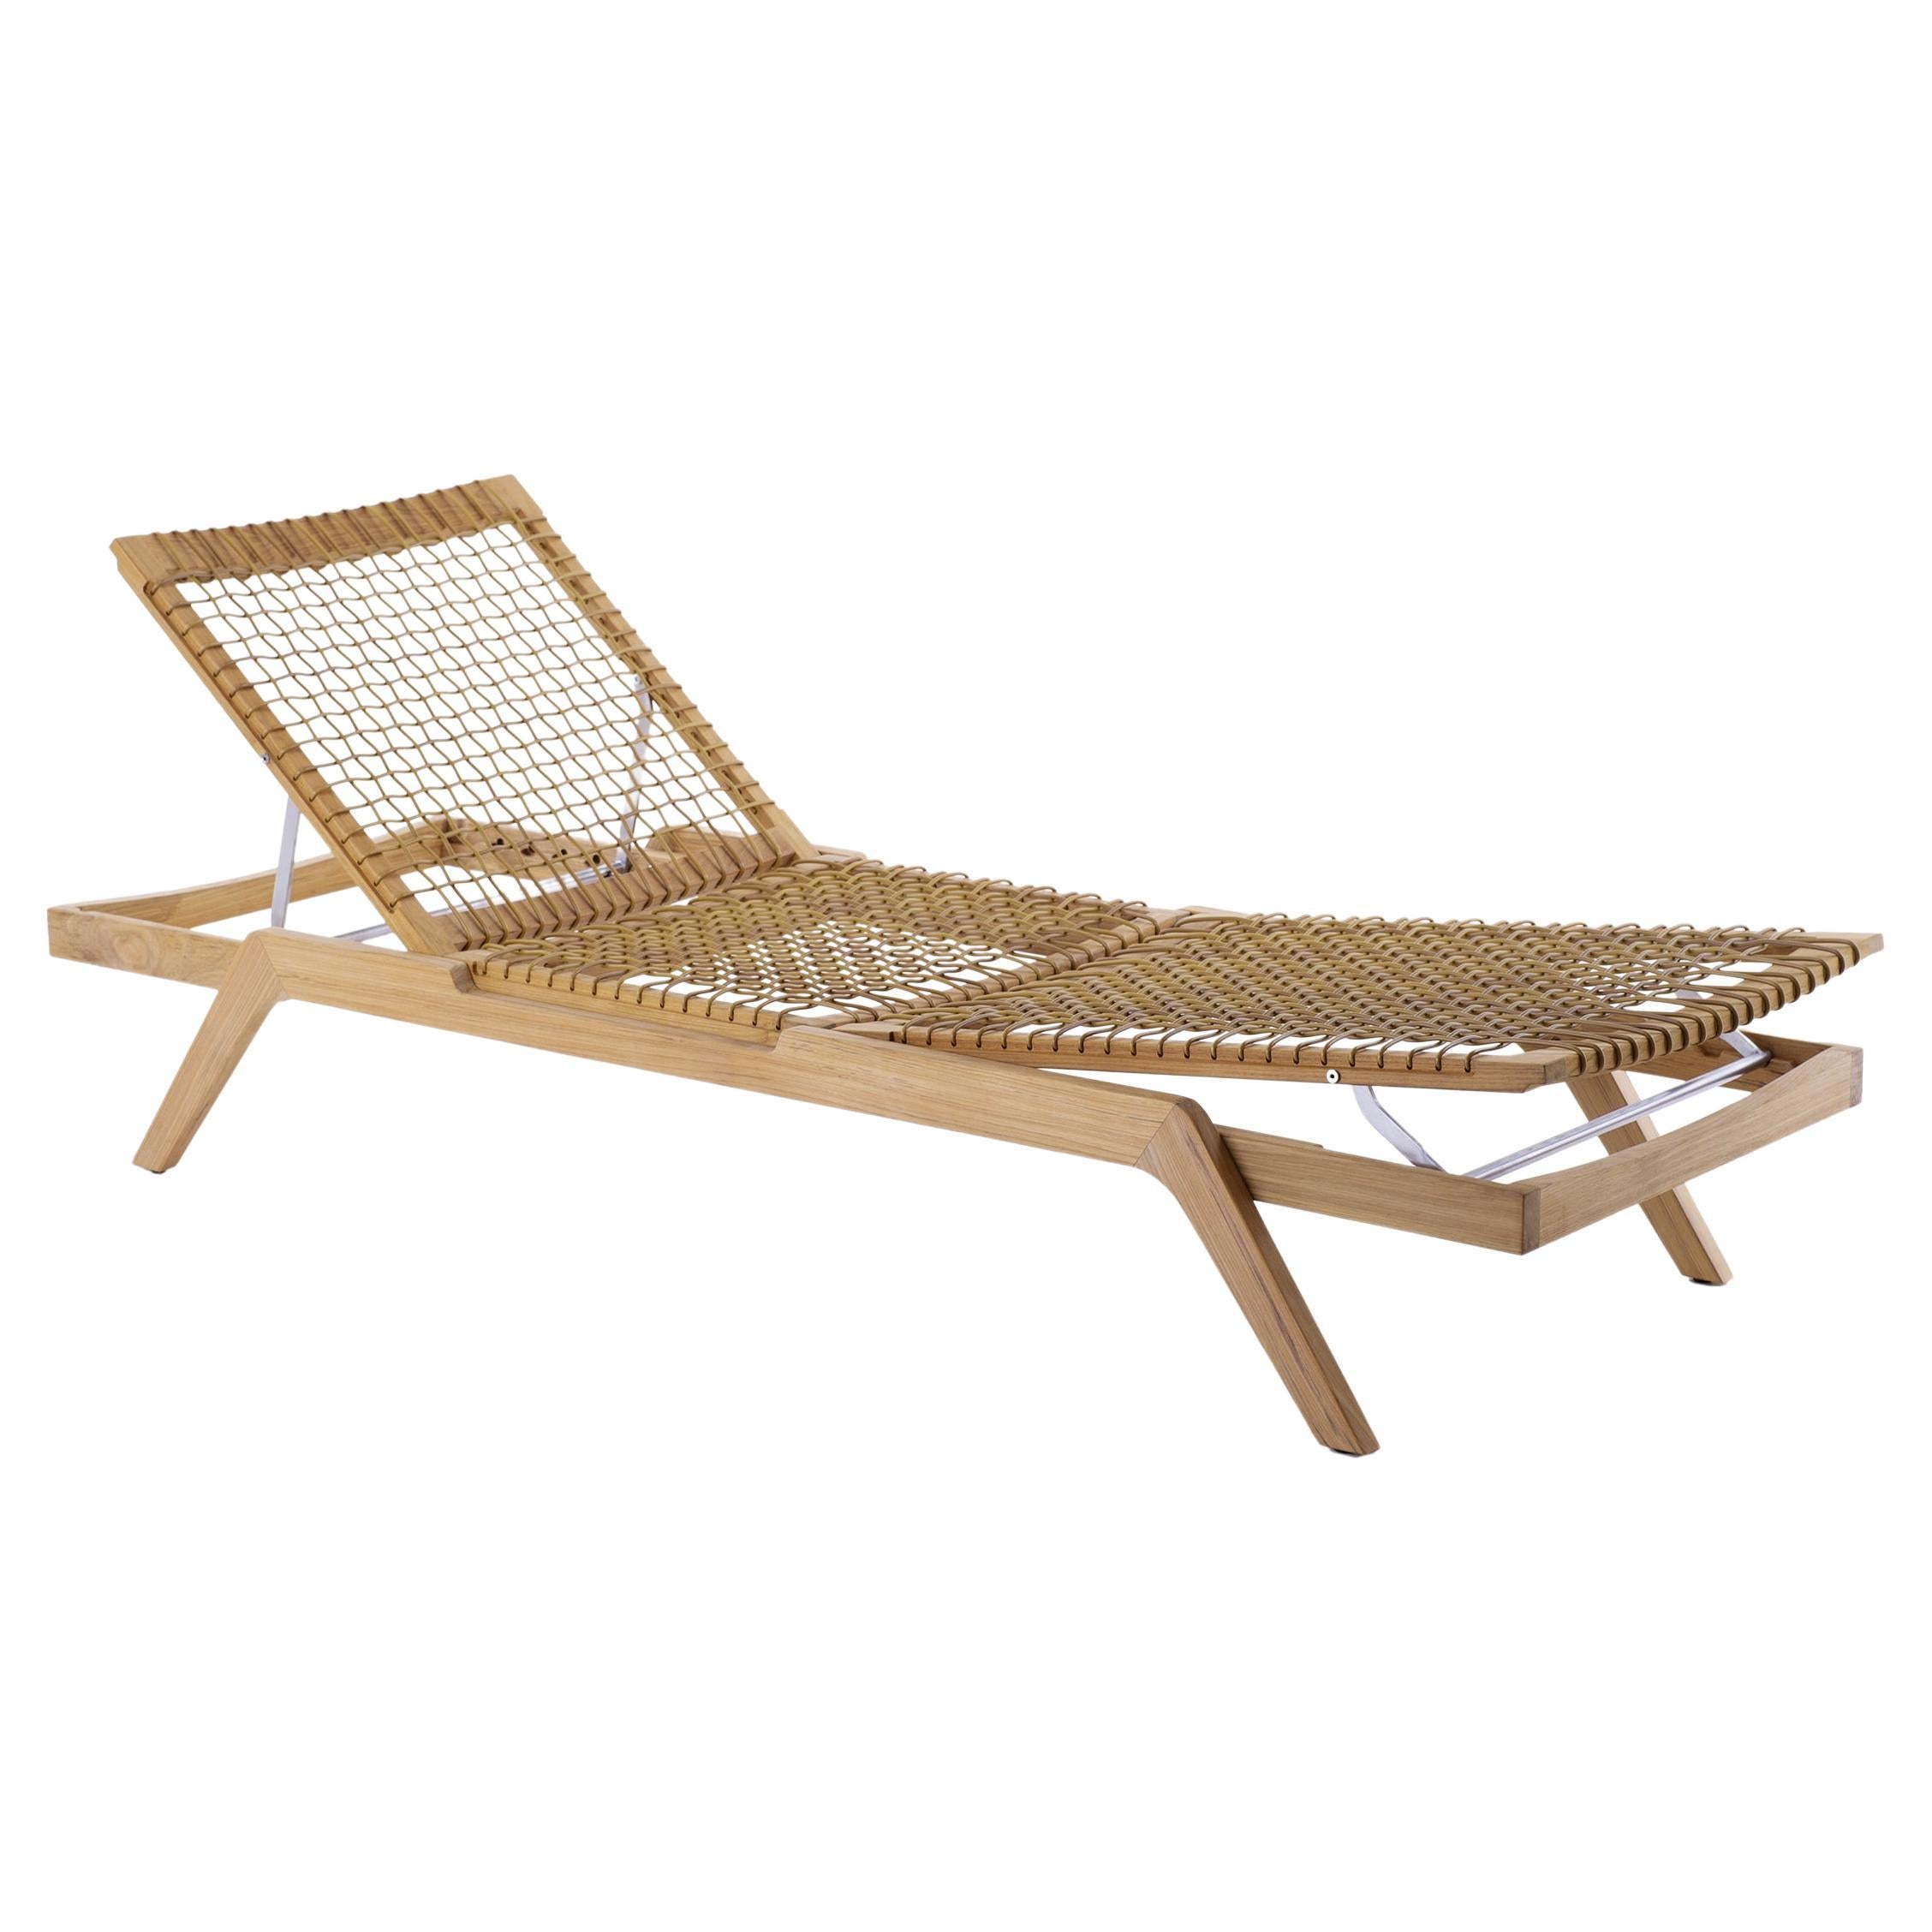 Unopiu' Synthesis Sunlounger Outdoor Collection - IN STOCK For Sale